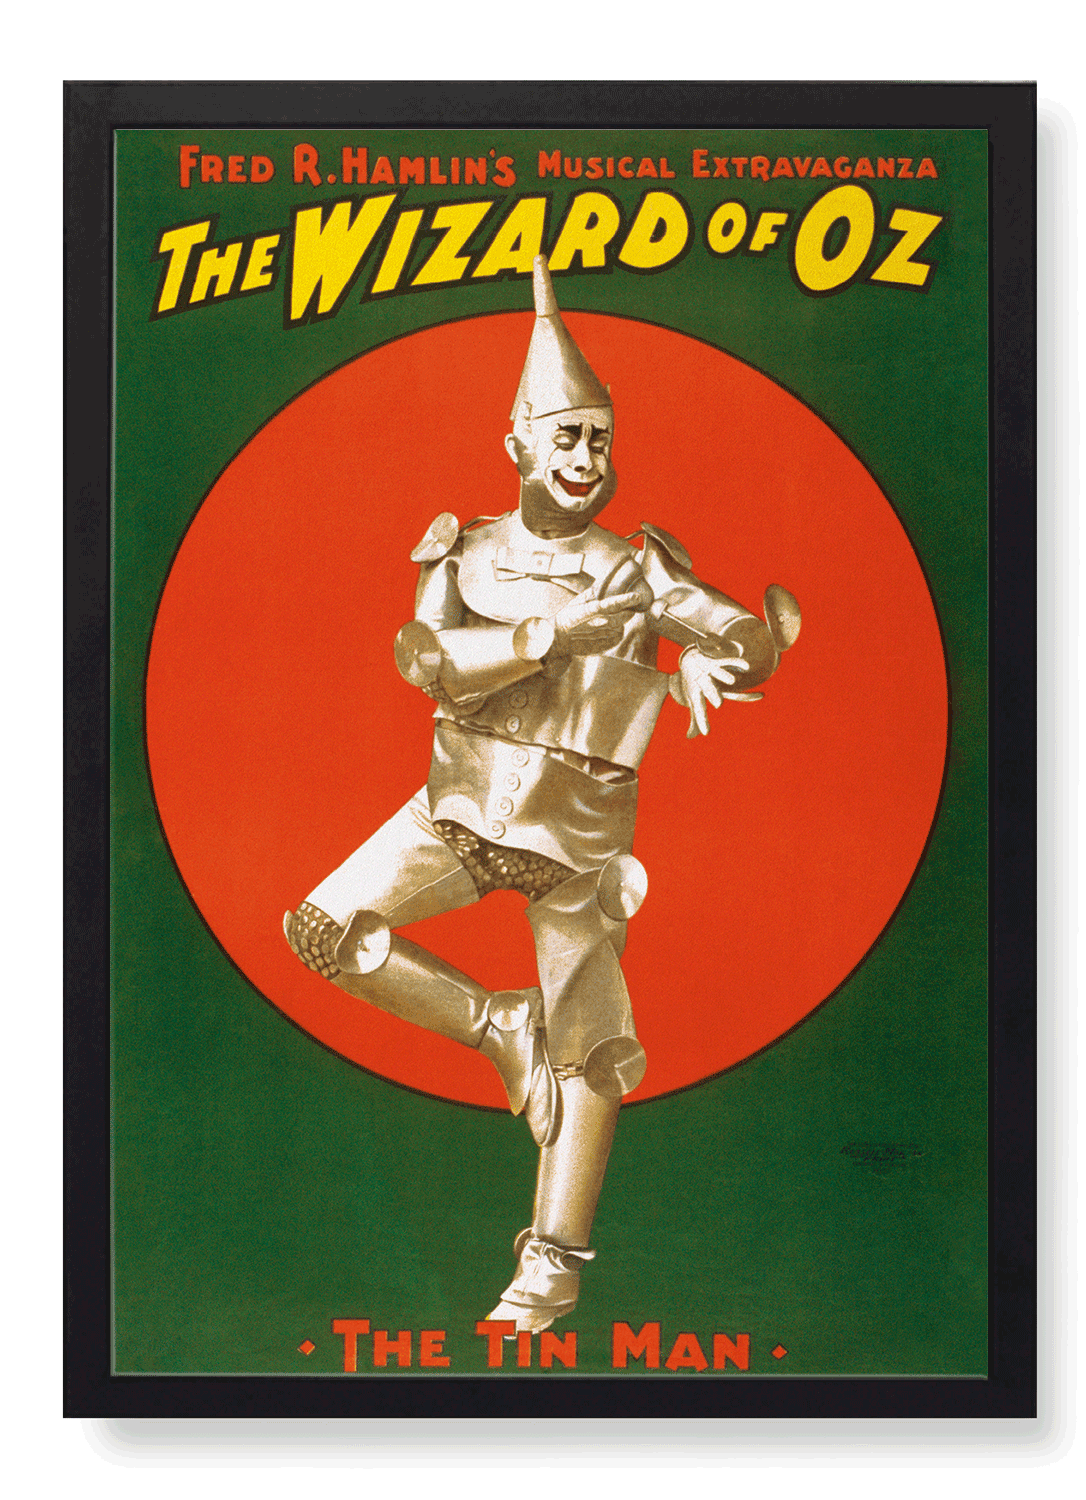 THE WIZARD OF OZ (1902)